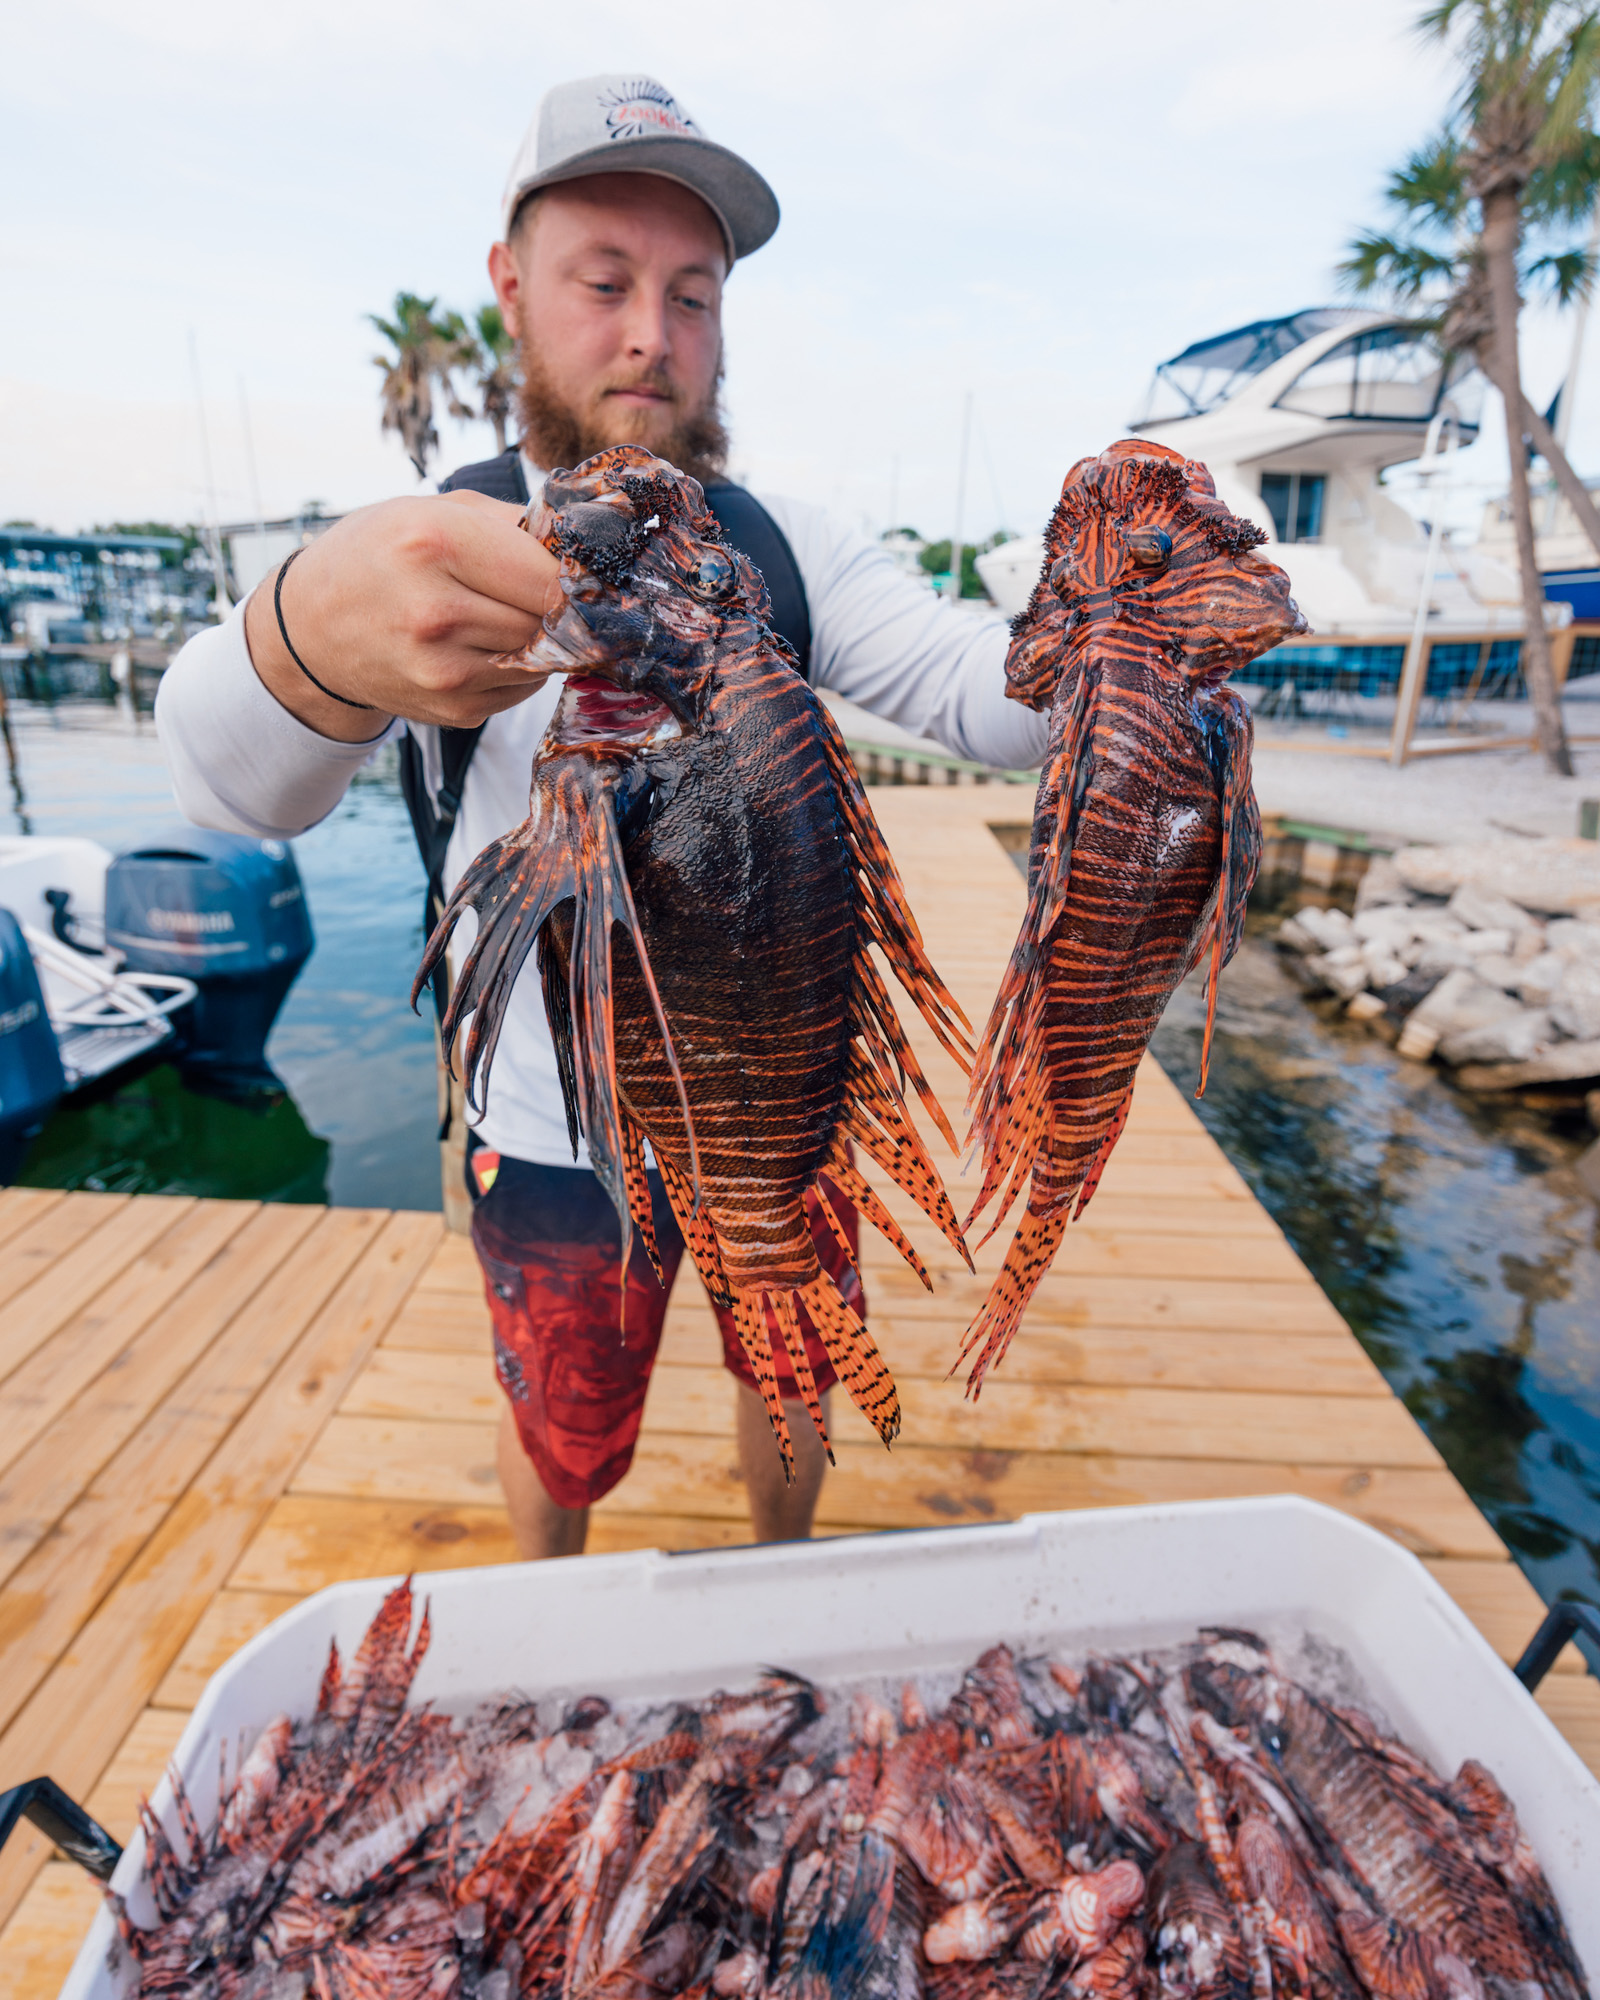 A guy in a baseball cap holds up two lionfish.